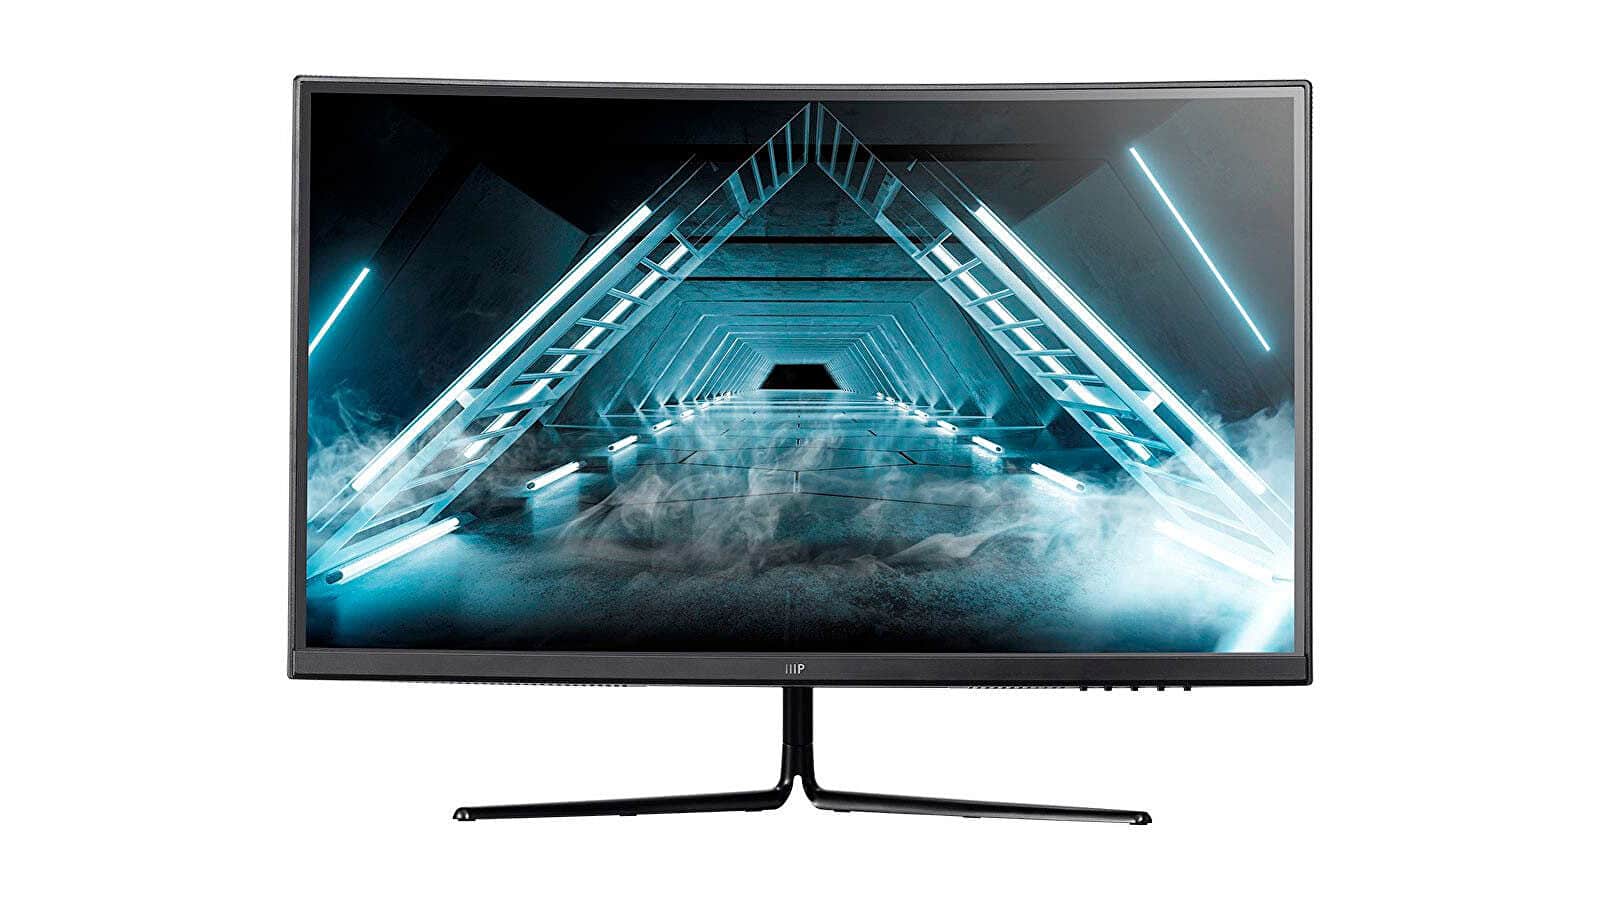 Get a 27-in 1440p 144Hz gaming monitor for $190 today after a $60 discount